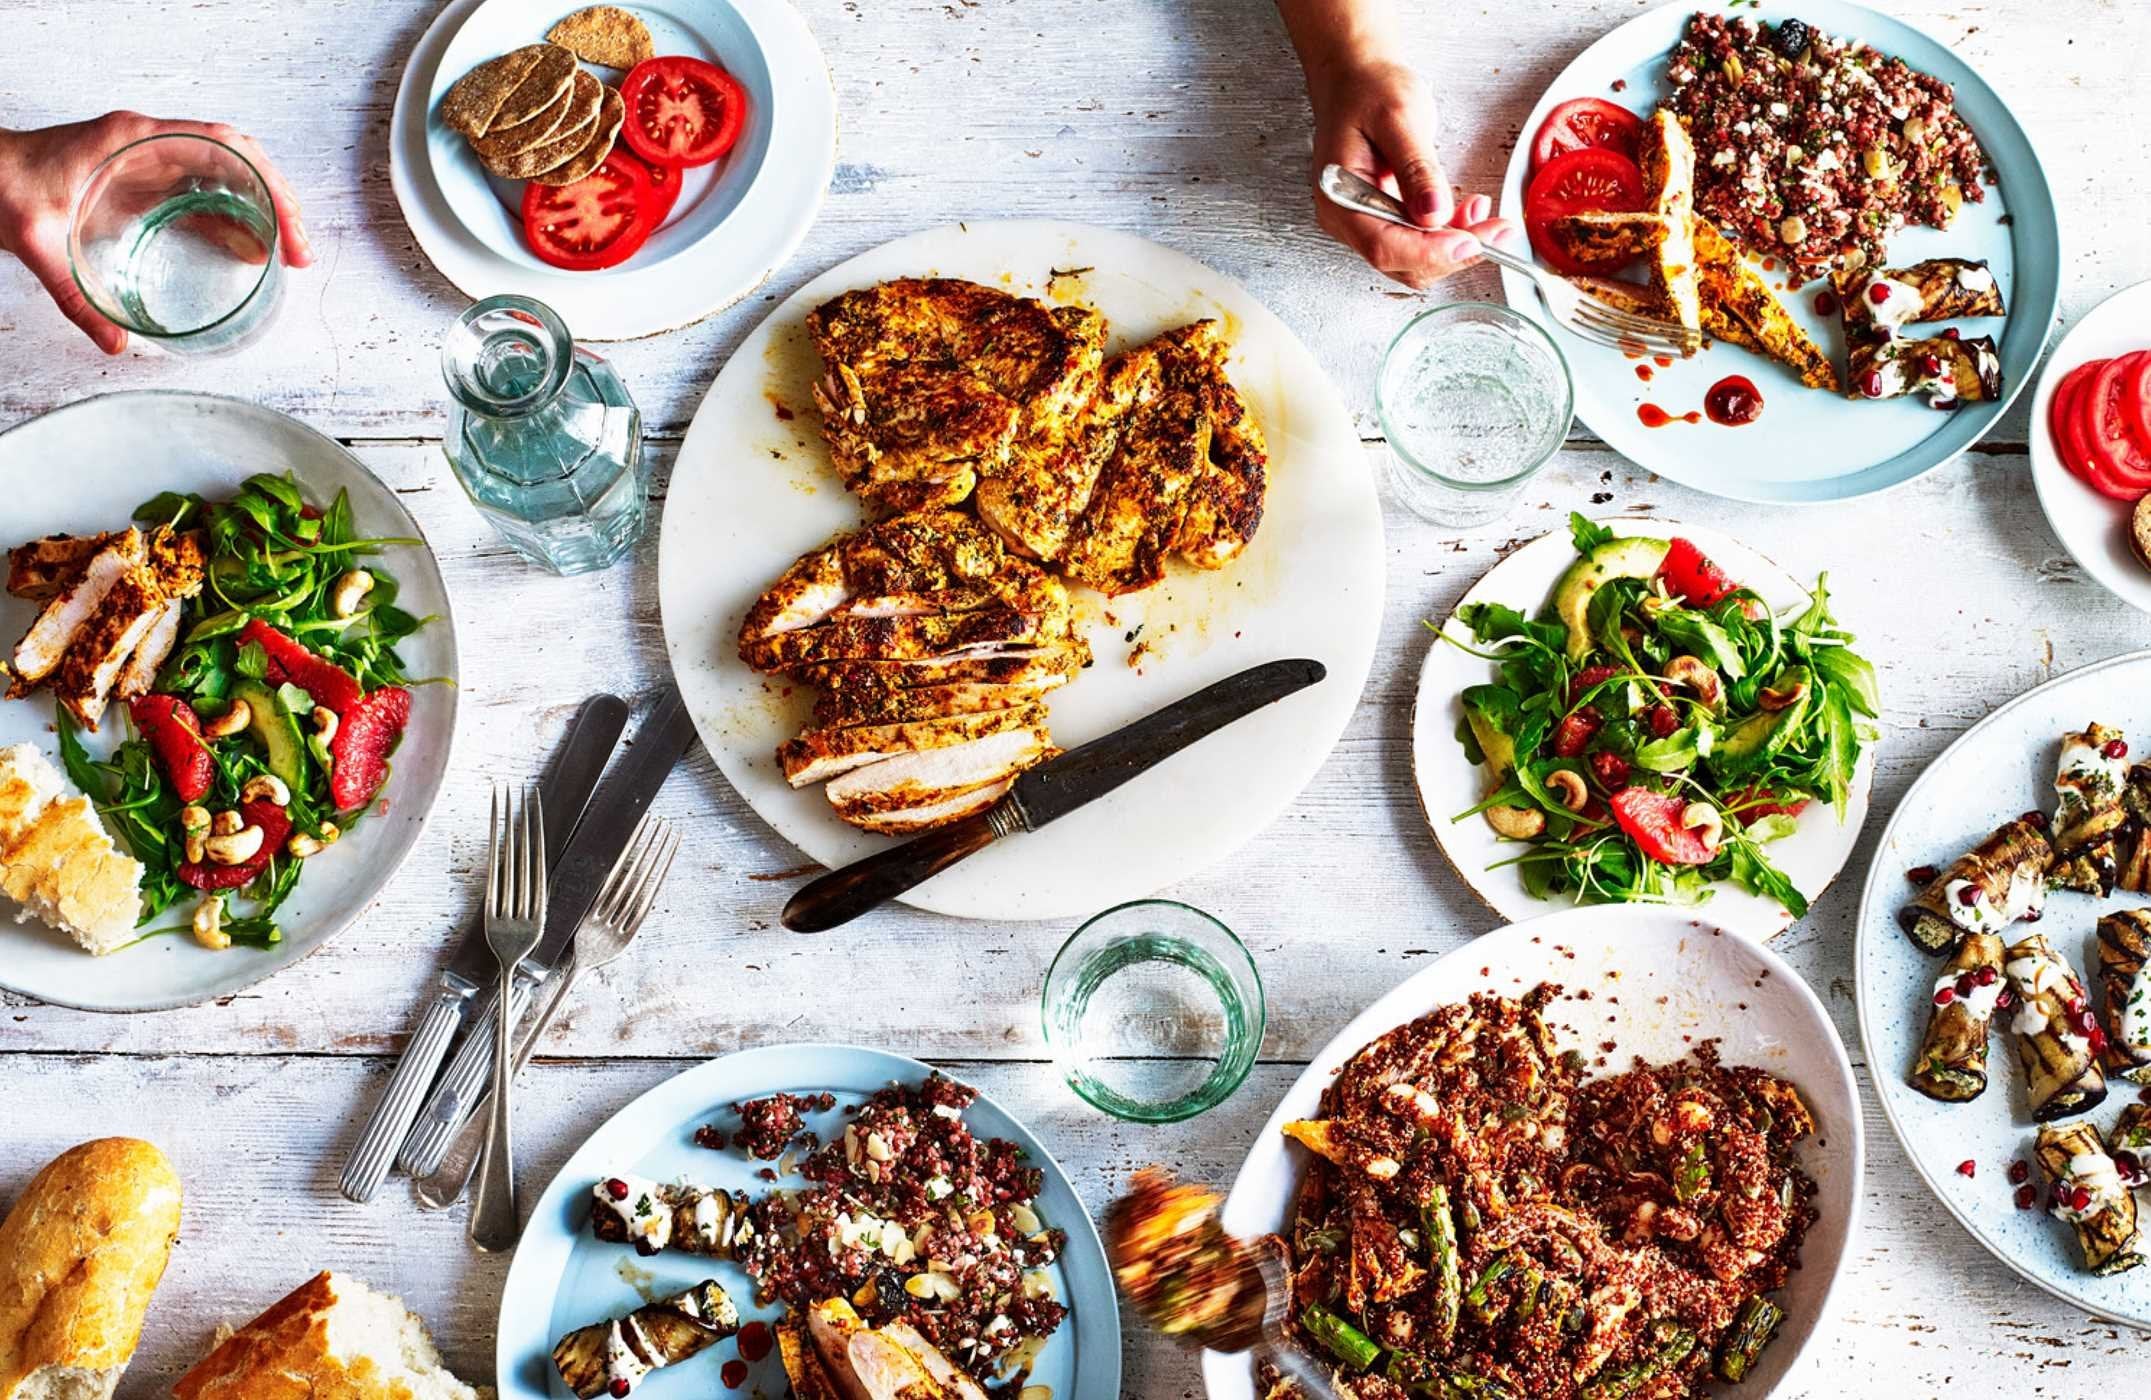 Feasts: Middle Eastern Food to Savor and Share (Sabrina Ghayour)